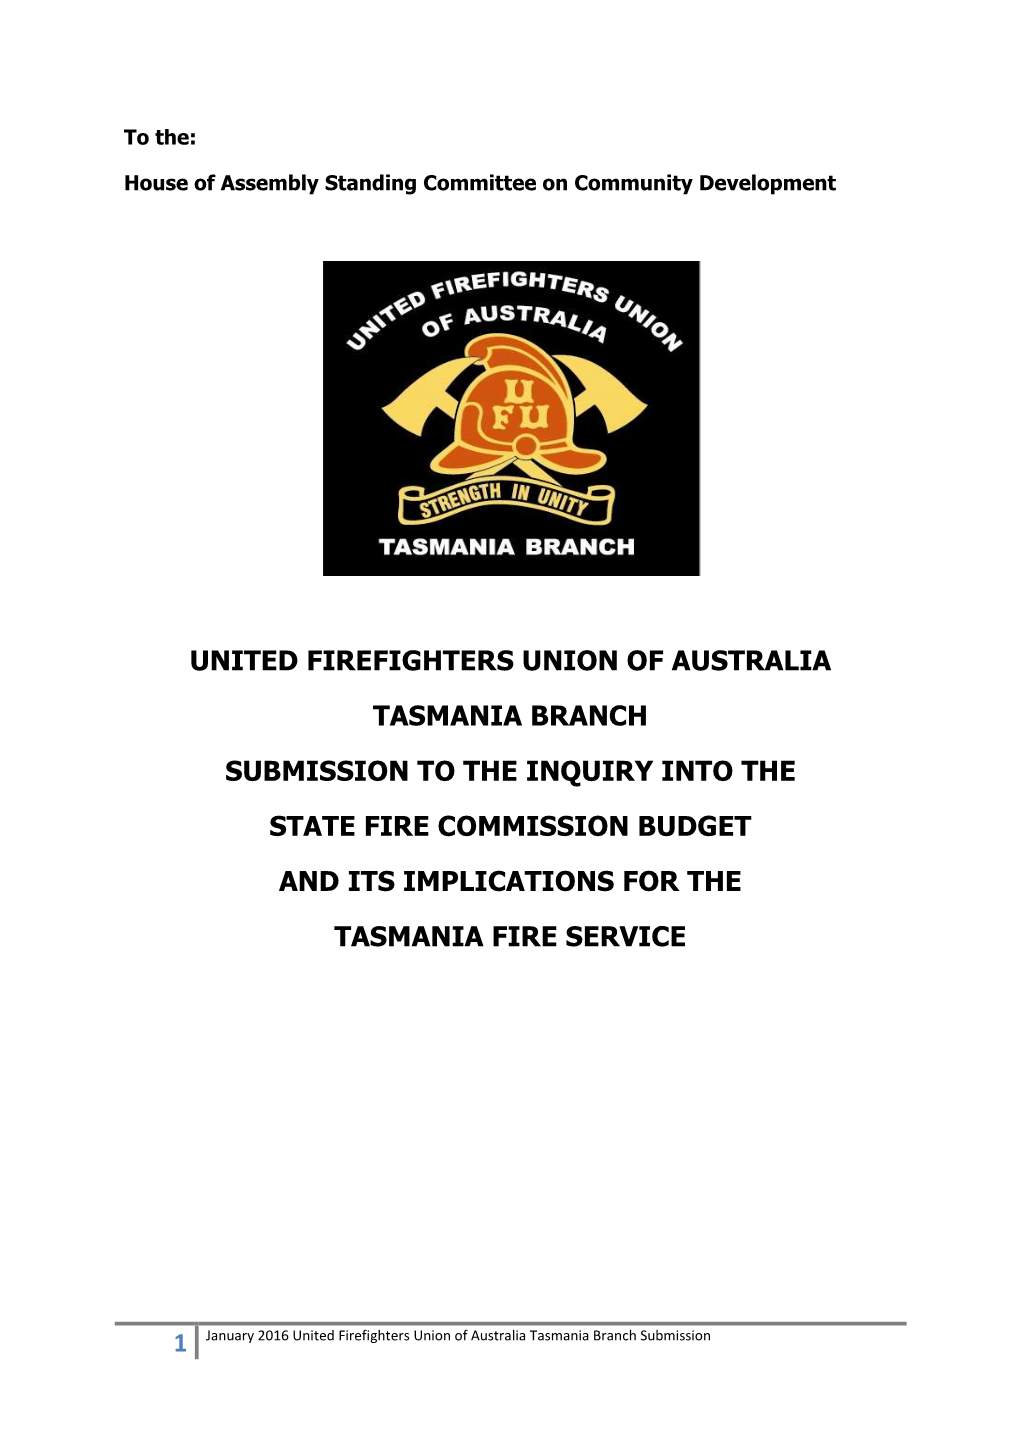 United Firefighters Union of Australia Tasmania Branch Submission